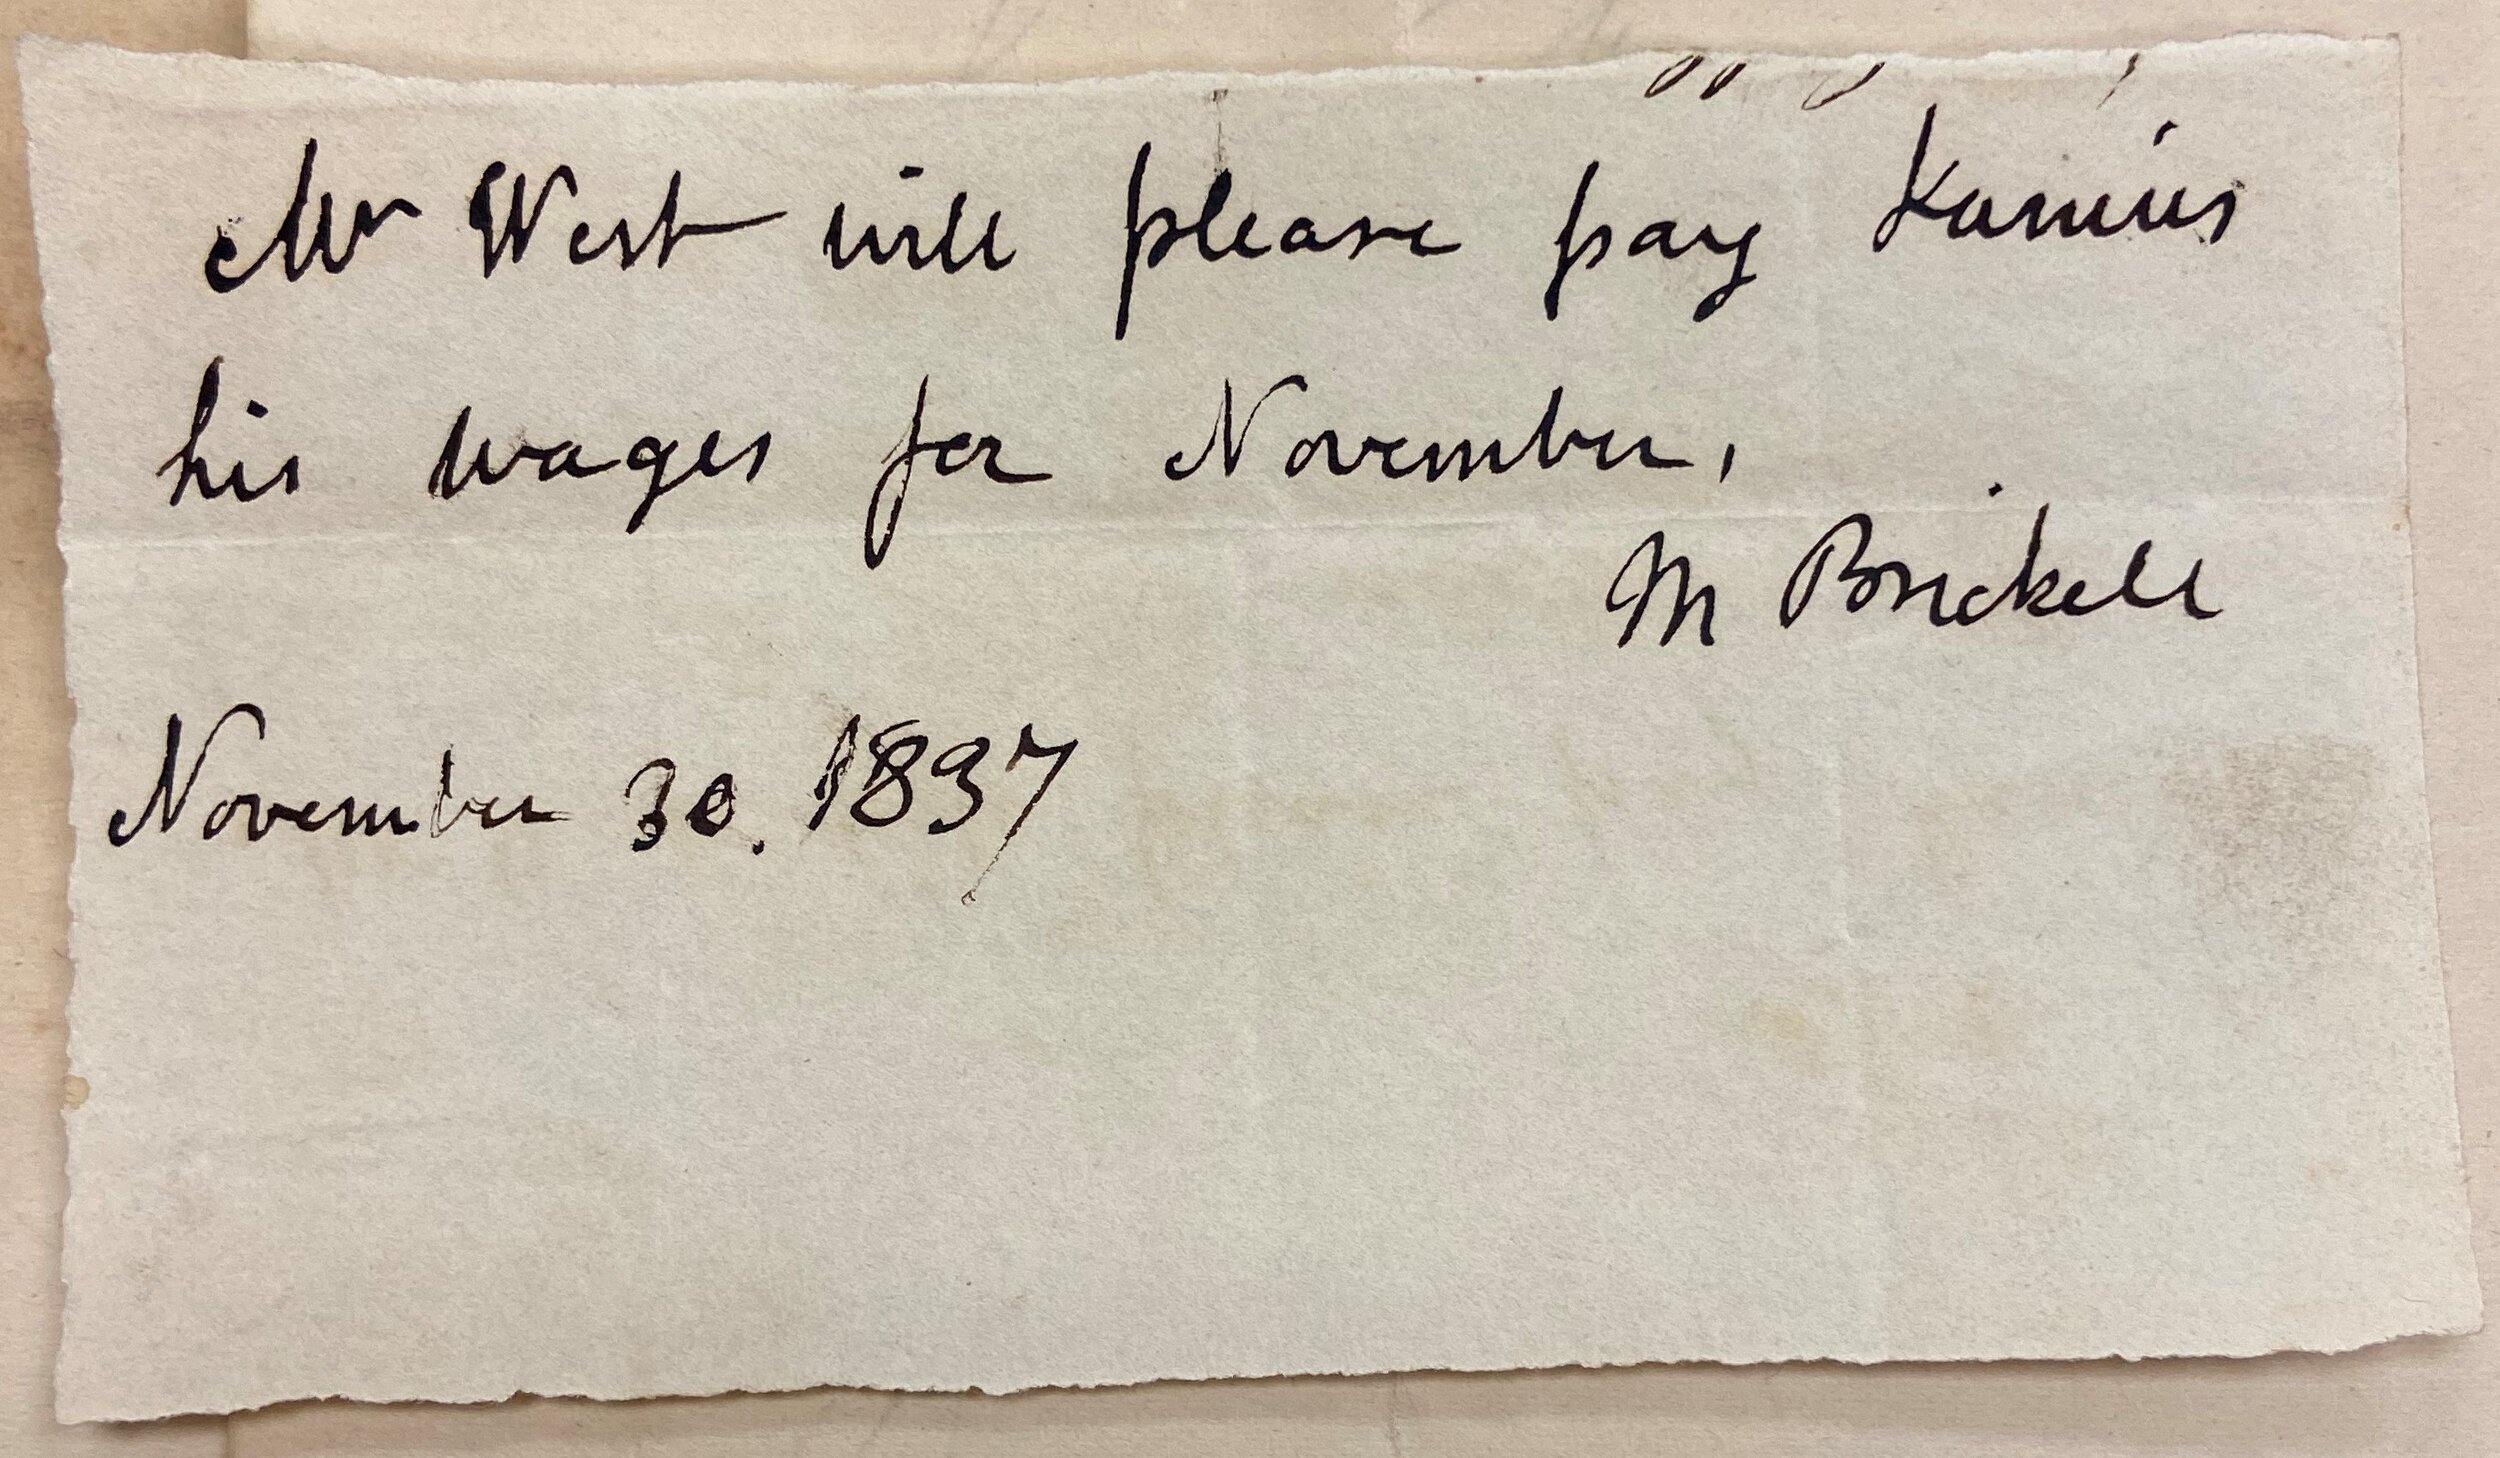 Handwritten note reading, "Mr West will please pay junius his wages for November, M Brickell November 30, 1837."